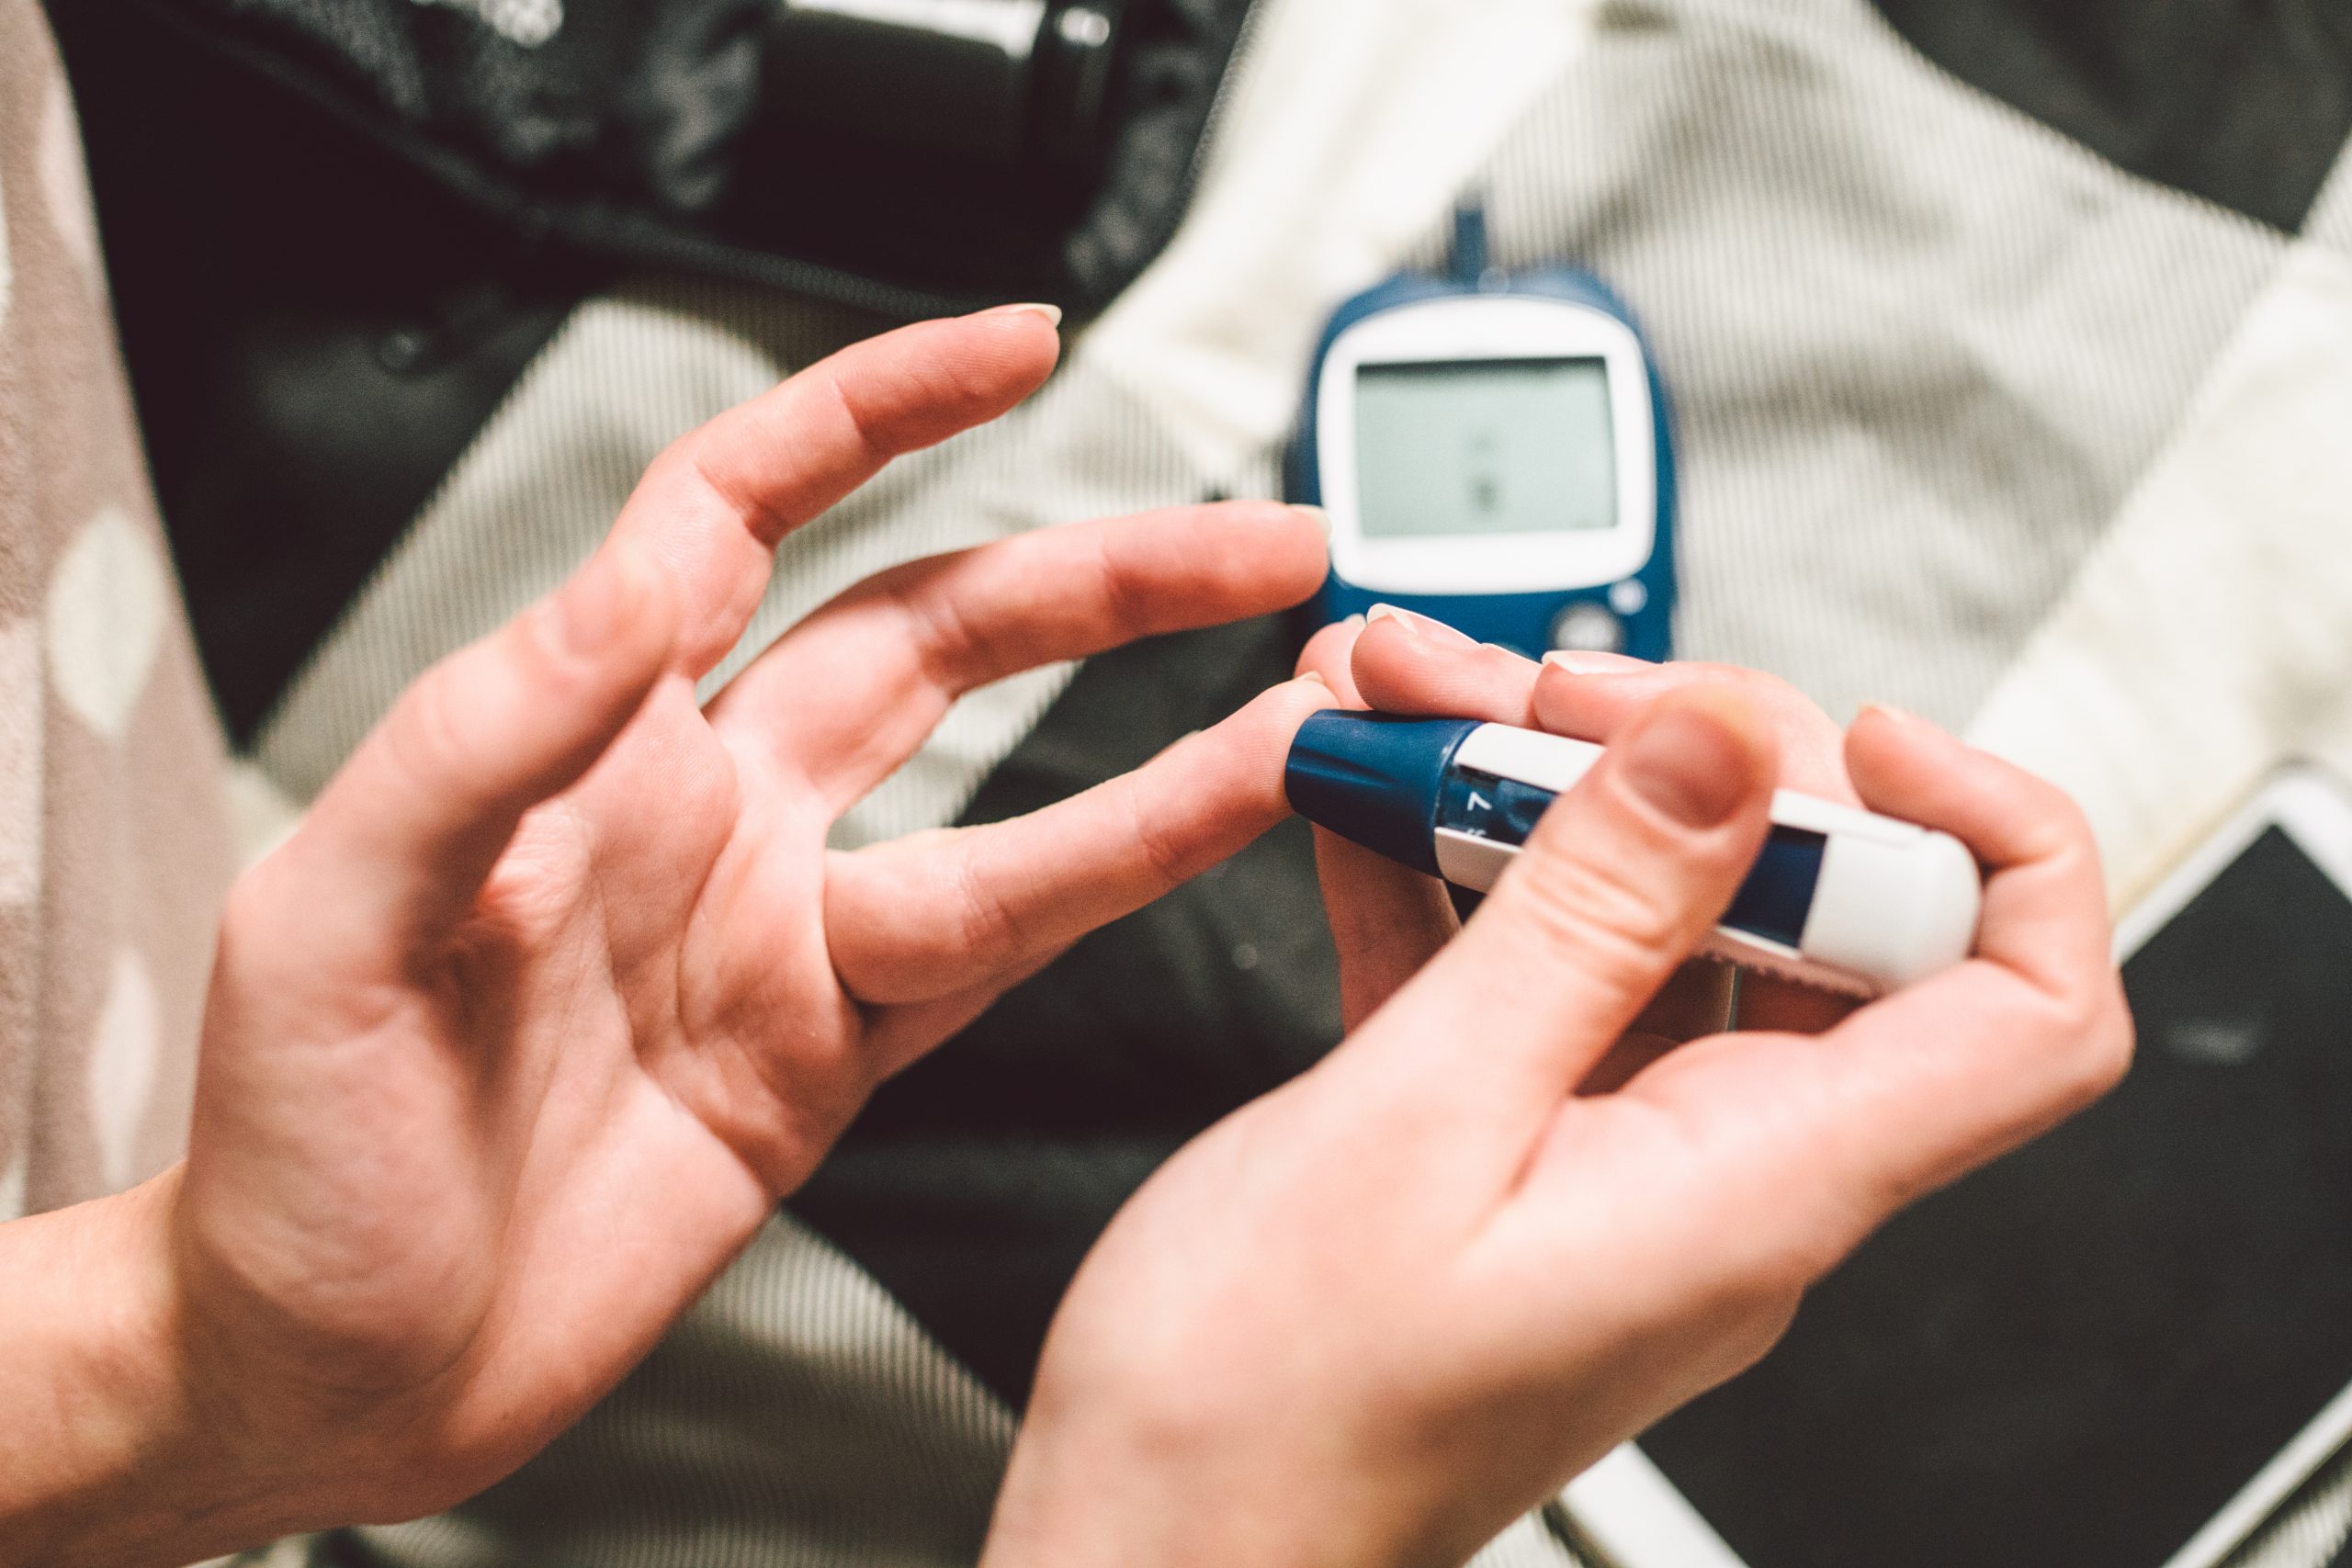 The function of insulin in controlling blood sugar